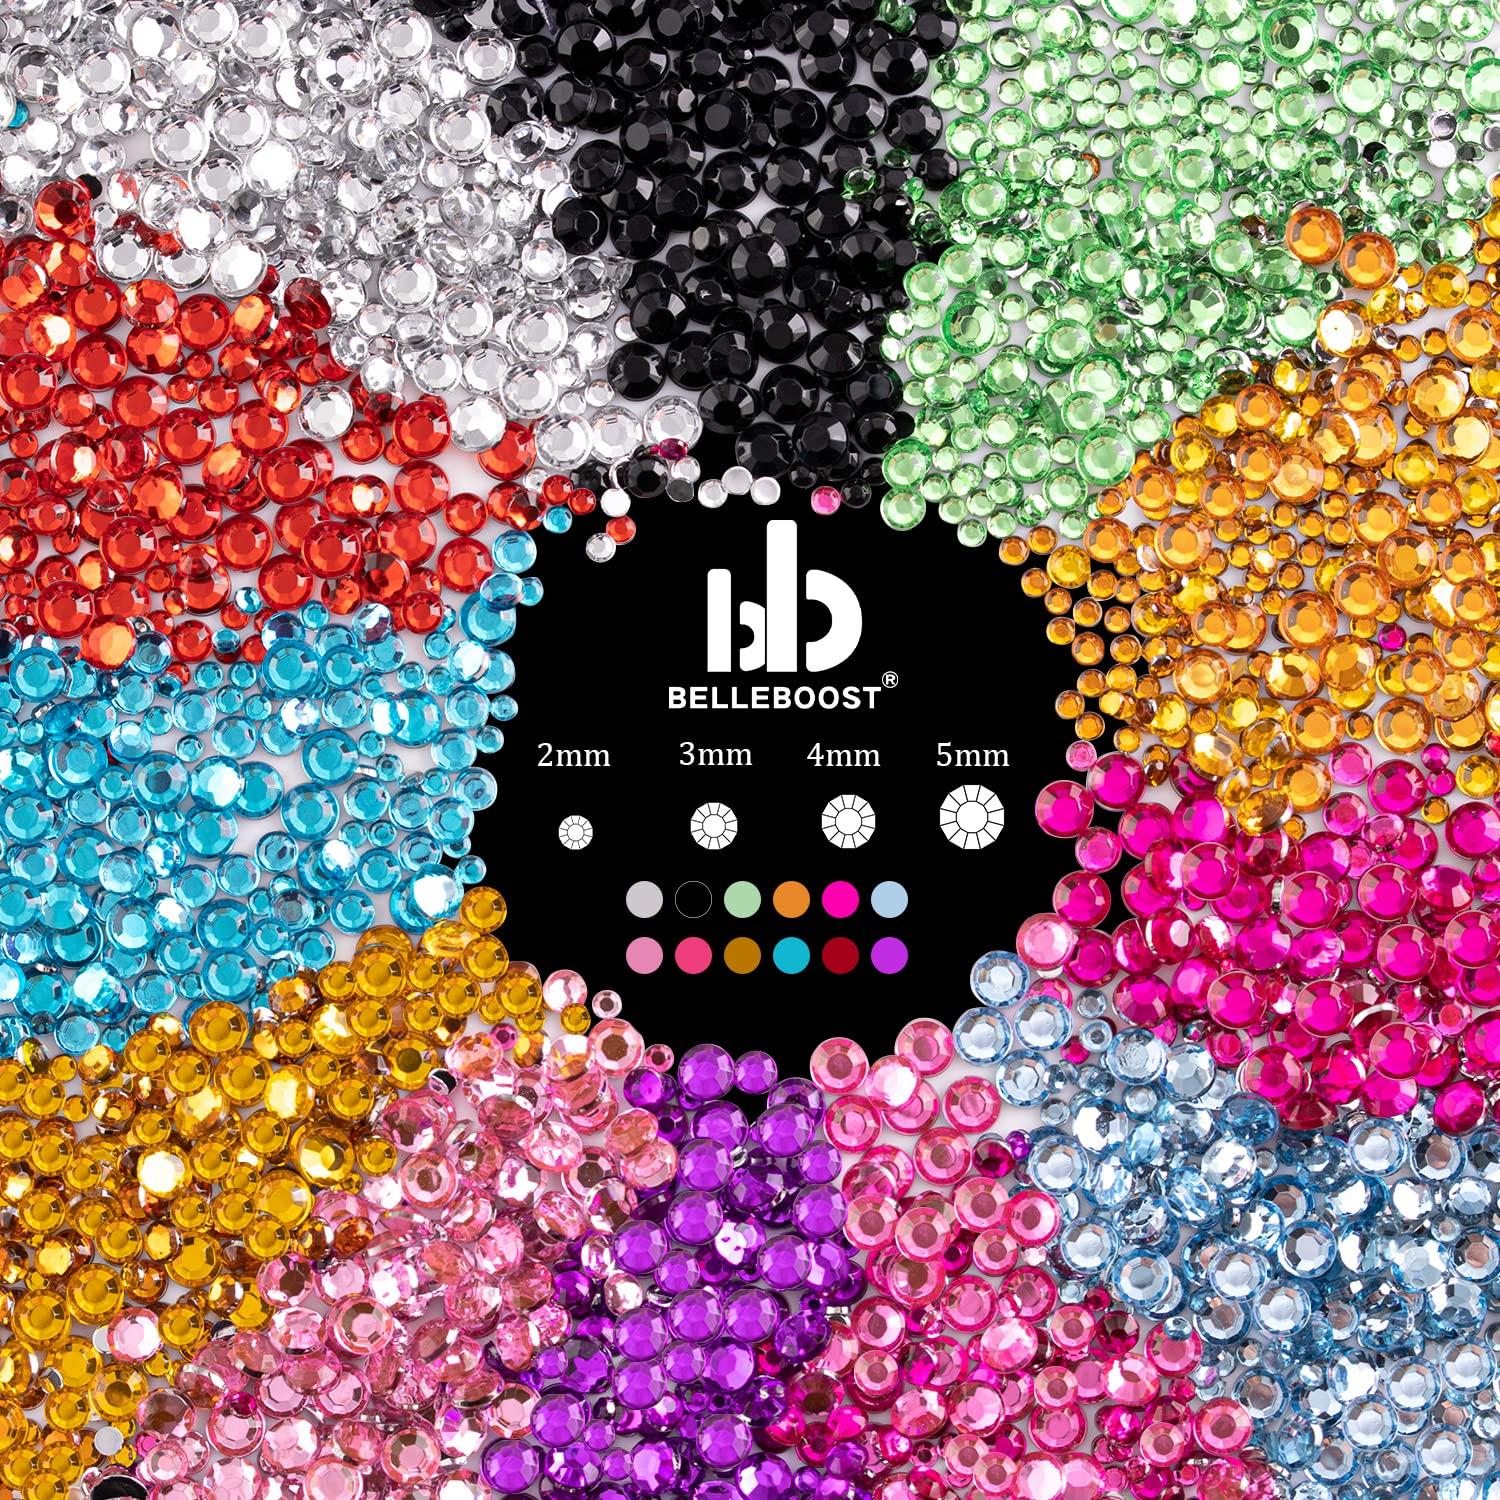  Two Packs of Flatback Rhinestones 4520 Pcs Colorful Nail Art  Rhinestones Flatback Crystal Colorful+AB+Transparent White Rhinestone with  Picker Pencil and Tweezer For Nail Art and Decoration : Beauty & Personal  Care